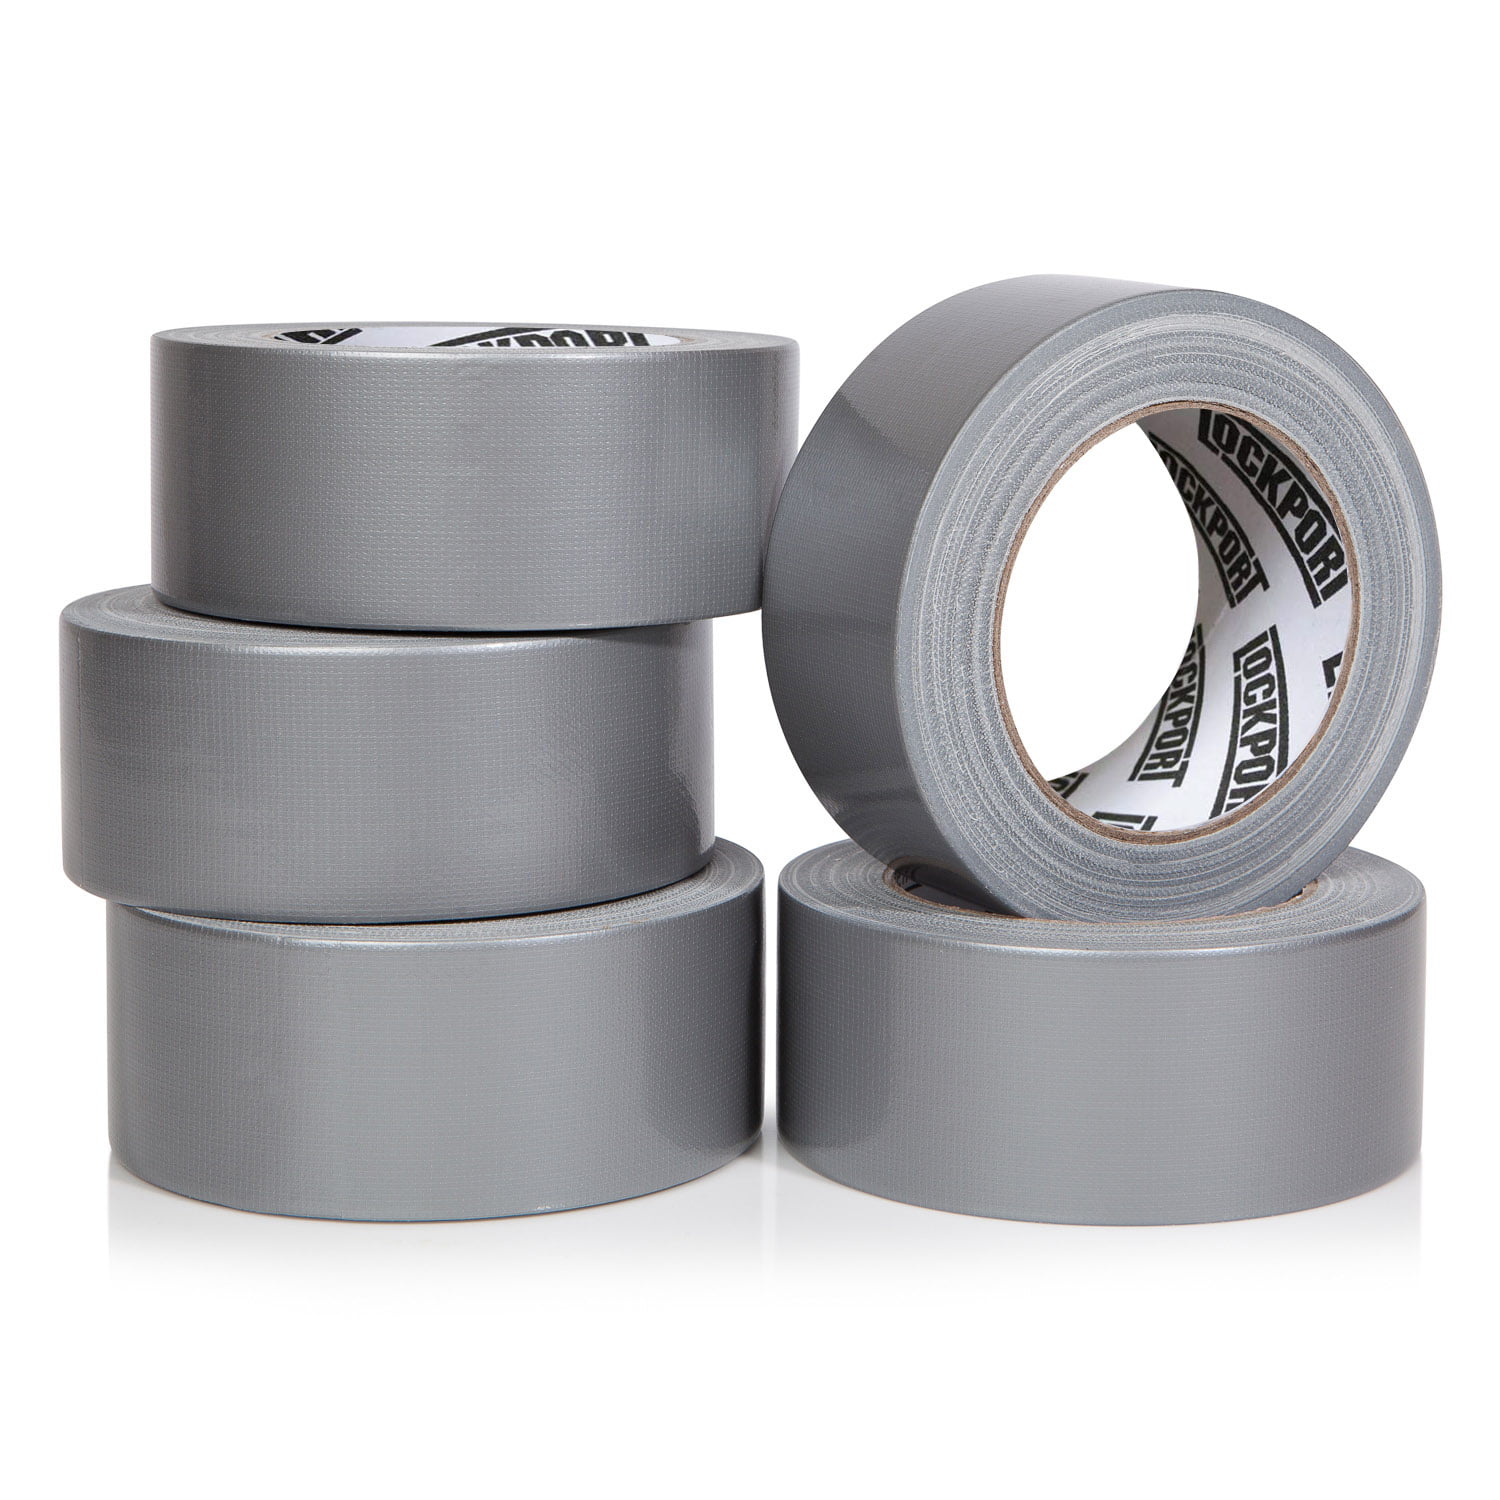 30 Yards x 2 inch ... Lockport Heavy Duty Silver Duct Tape 6 Roll Multi Pack 